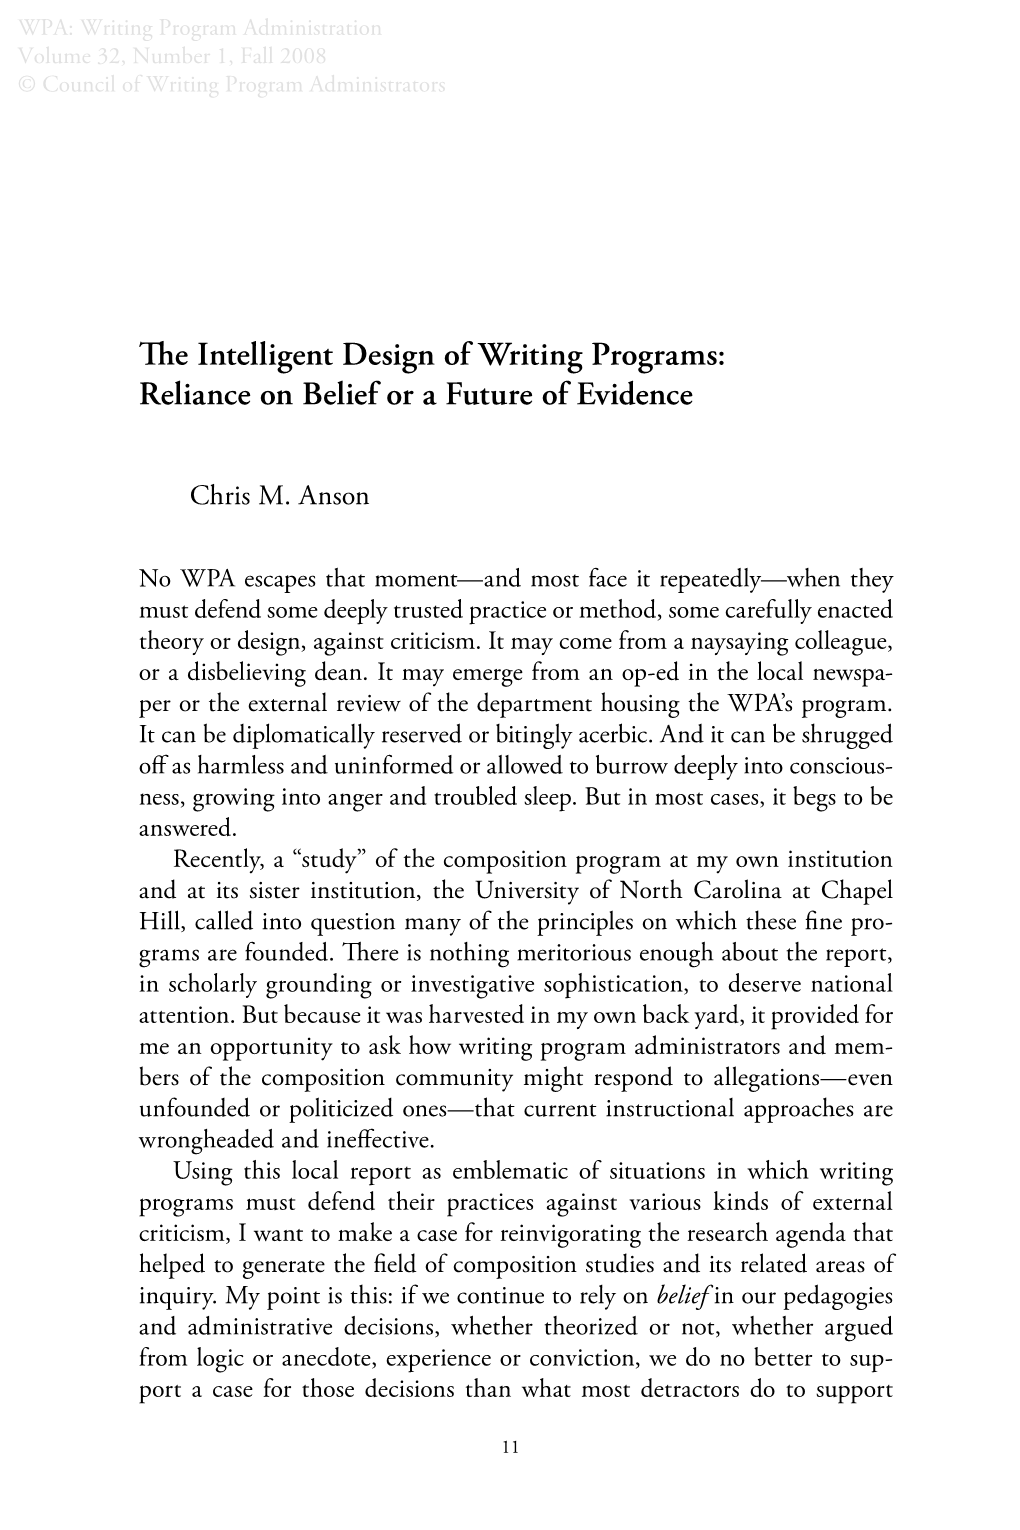 The Intelligent Design of Writing Programs: Reliance on Belief Or a Future of Evidence